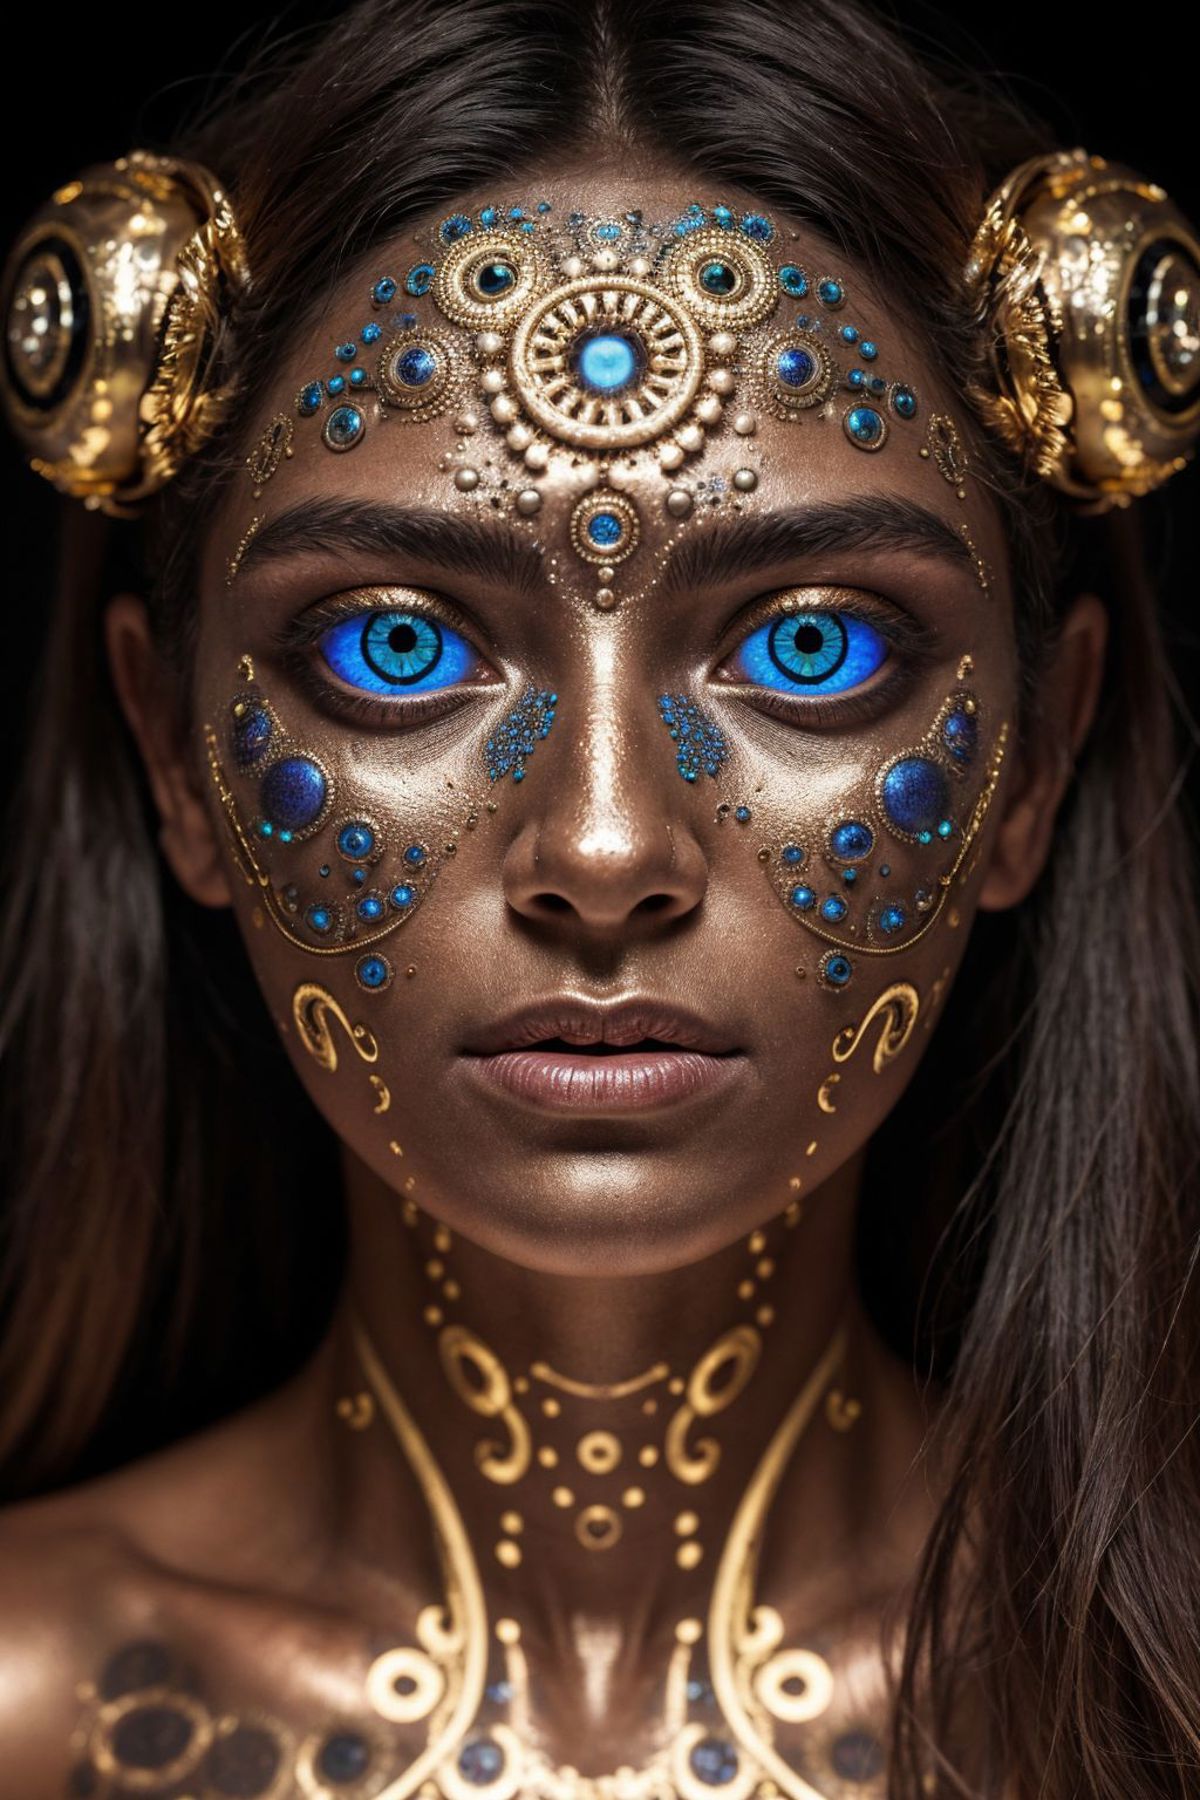 A close-up of a woman with blue eyes and gold makeup on her face.